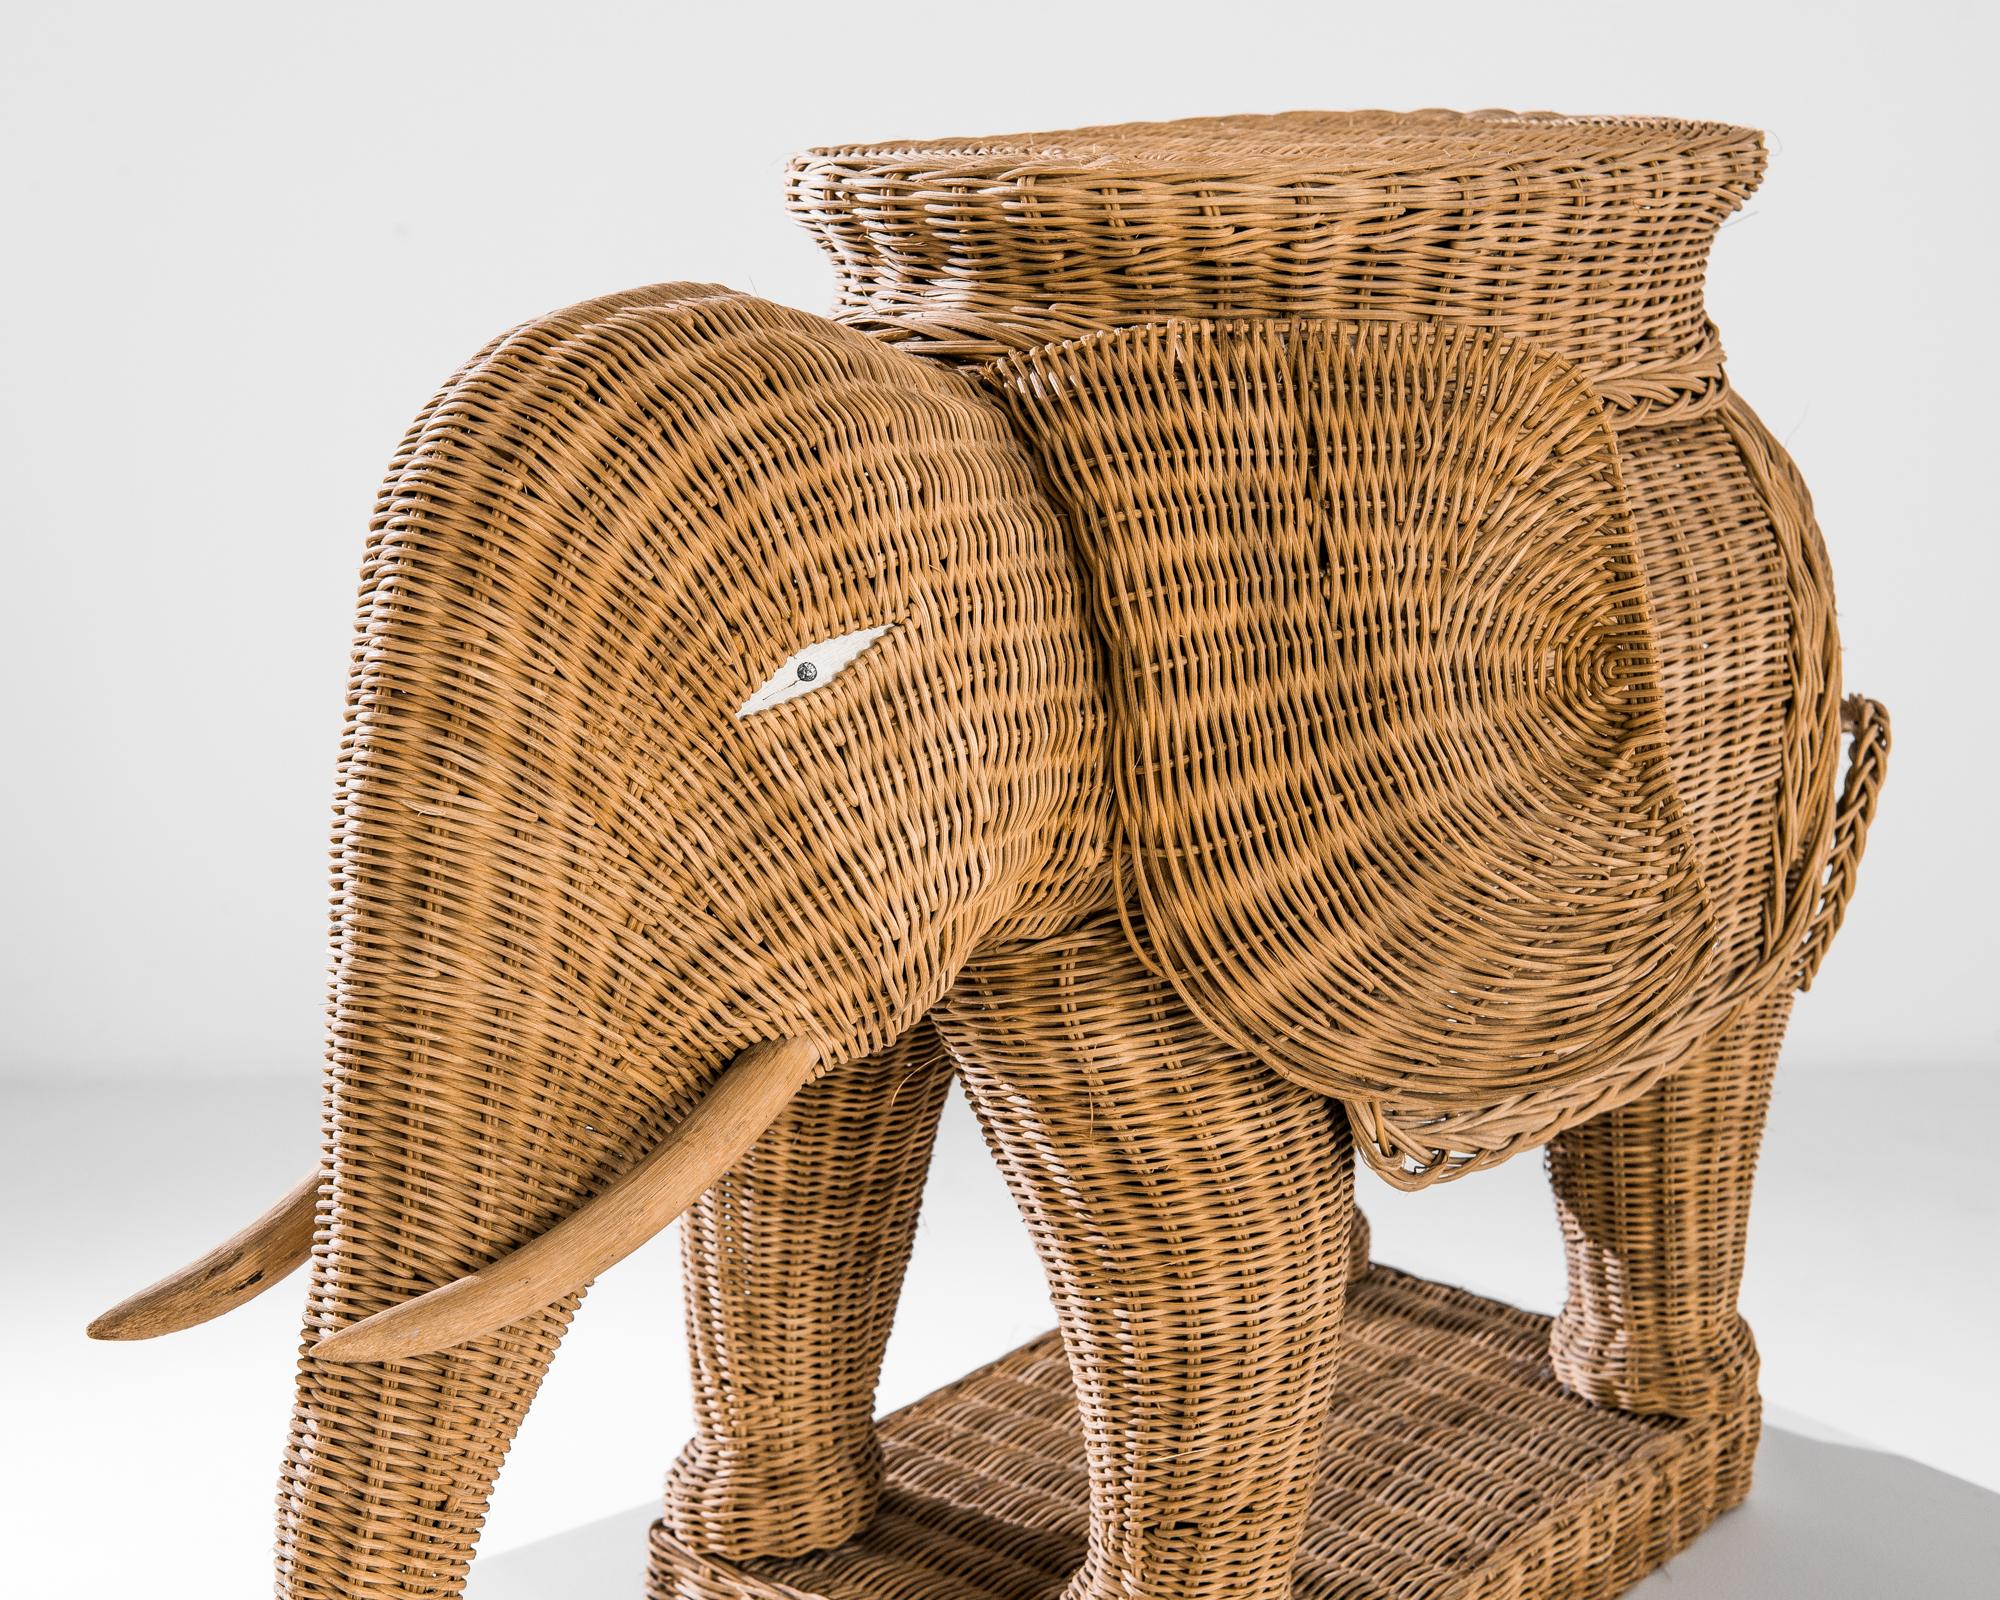 A wicker elephant from France, produced circa 1960. Measuring just under two feet tall, this woven sculpture is a monument in miniature to a king of the jungle. As it stands ready to ride, wrapped in a blanket and mounted with a howdah, or elephant